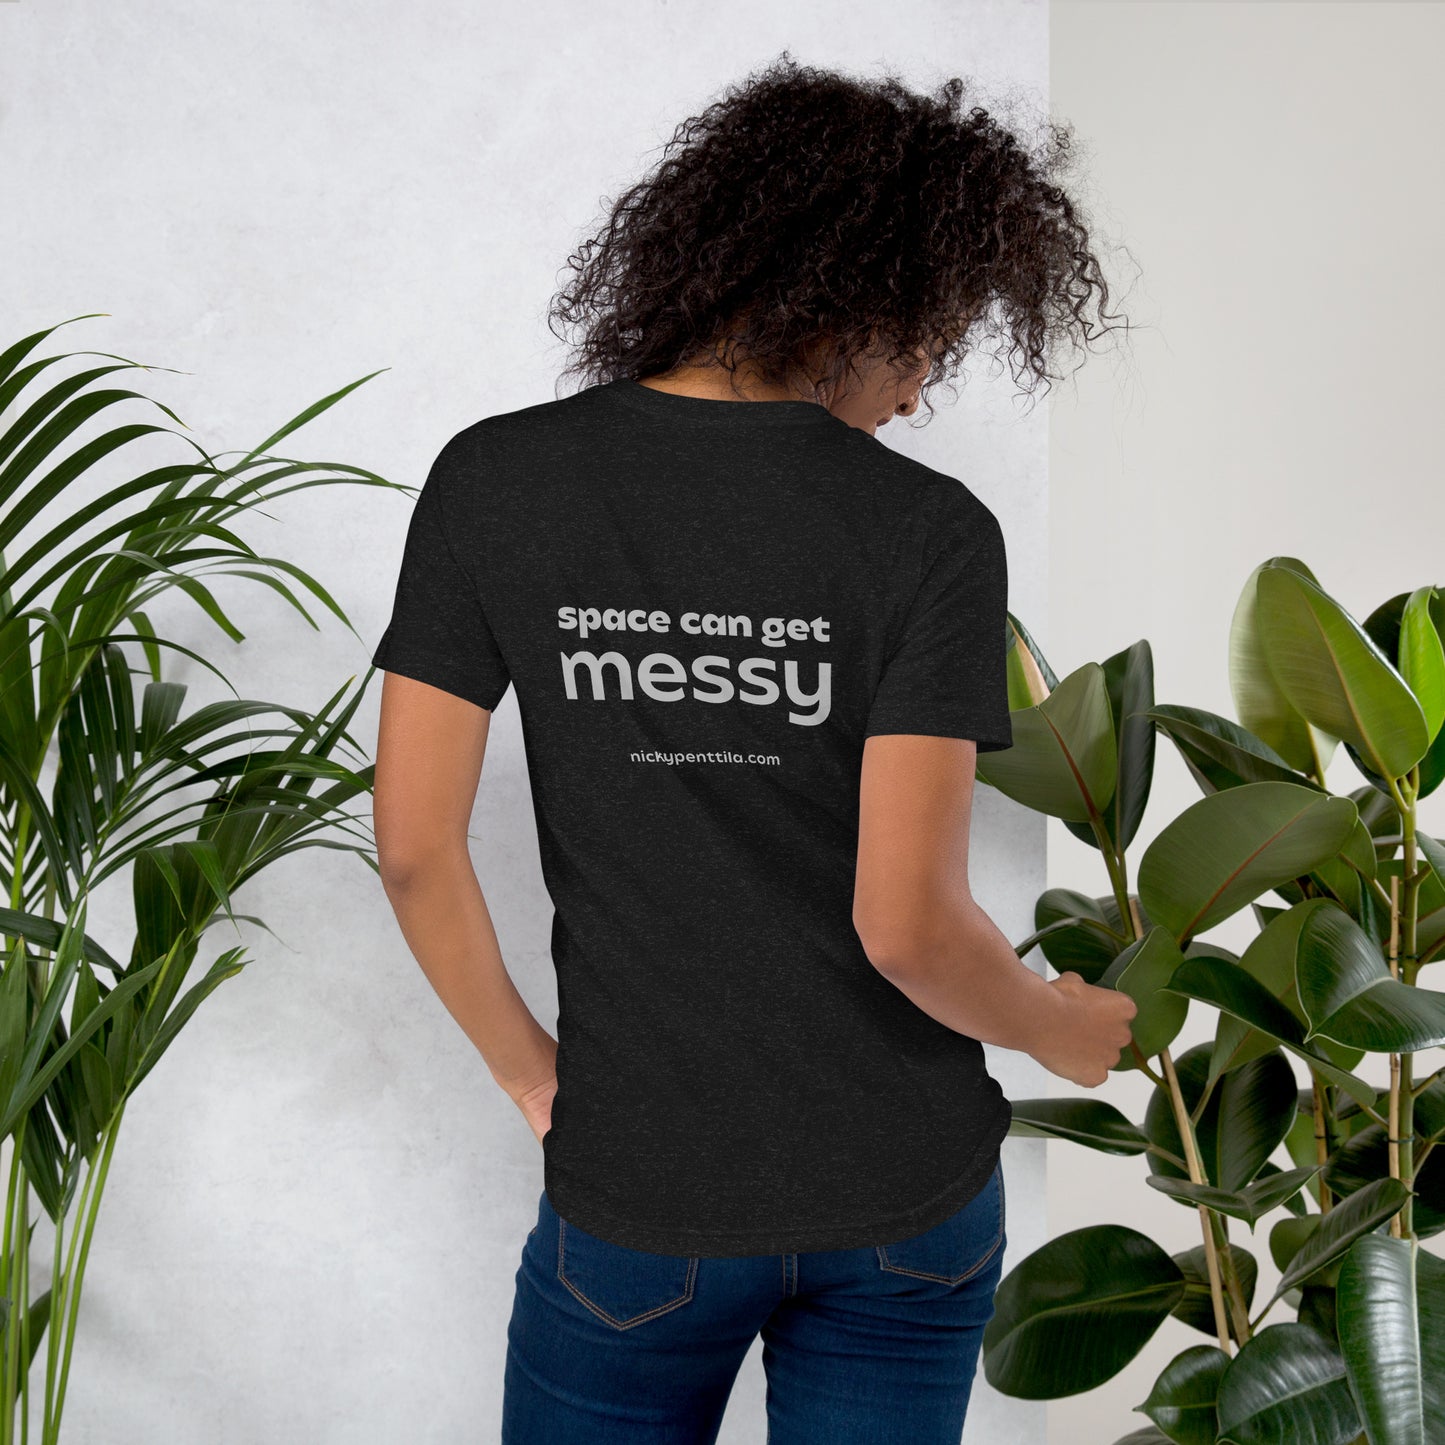 SPACE CAN GET MESSY | Unisex t-shirt